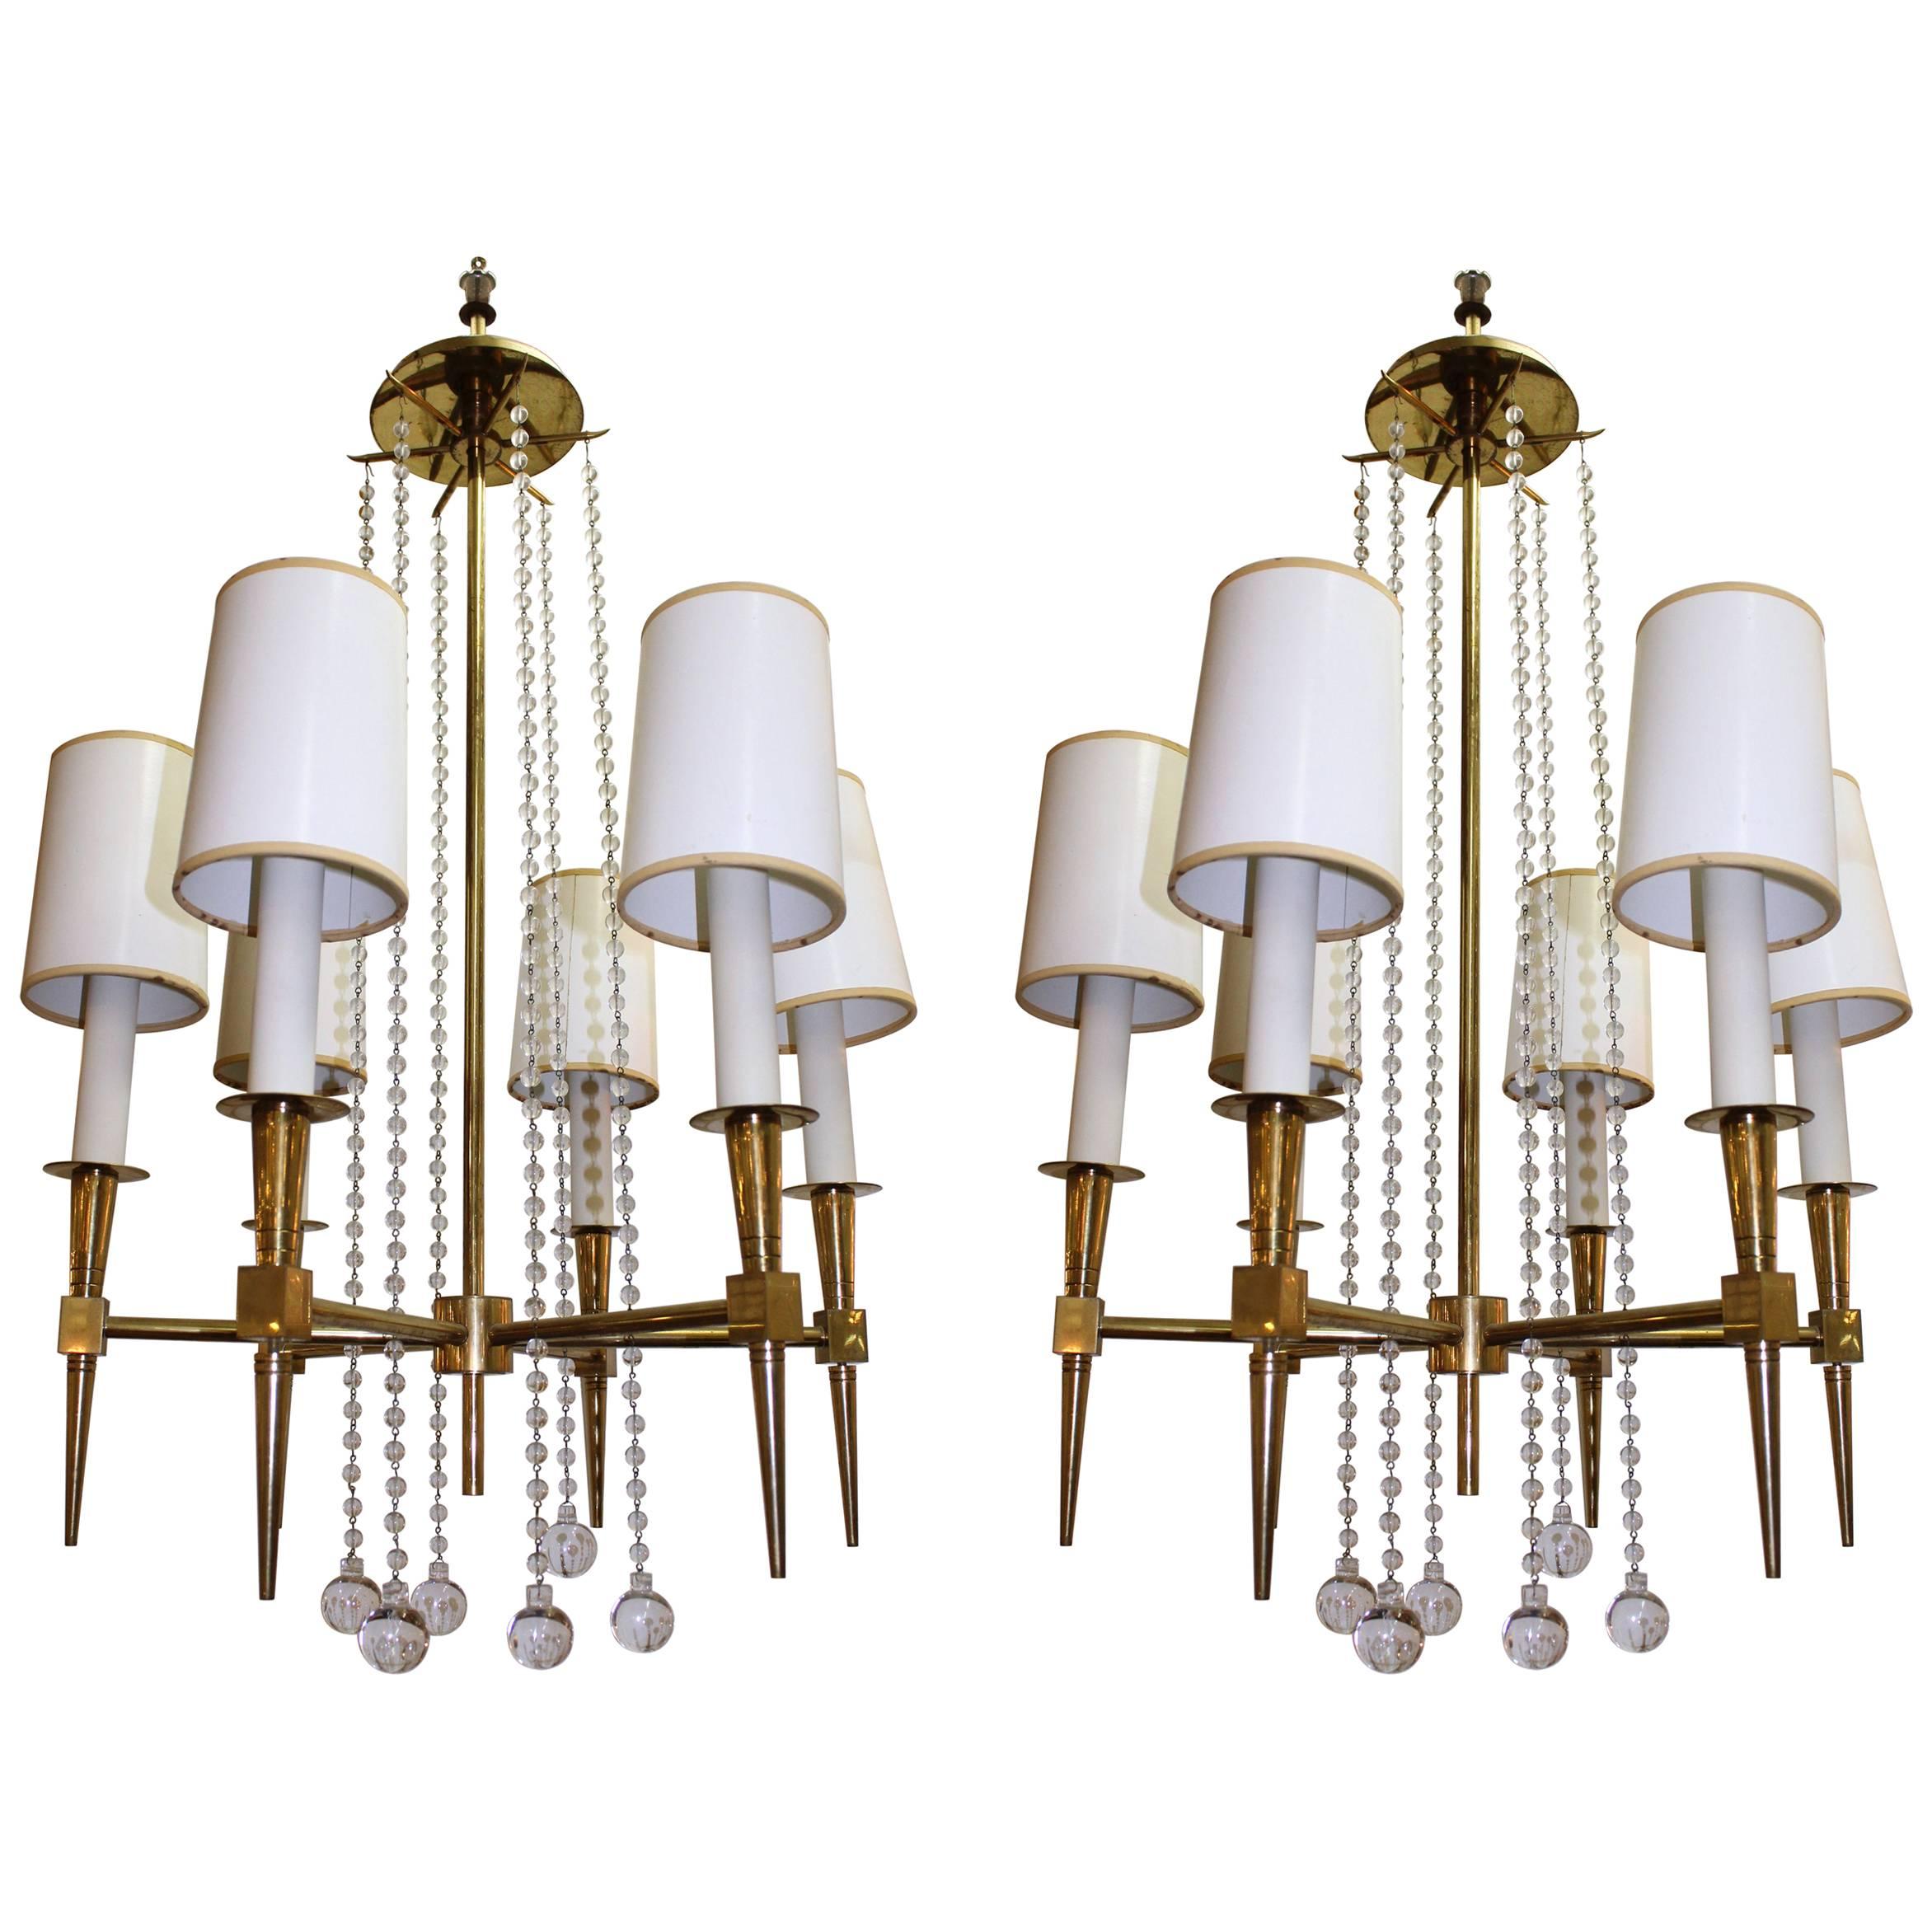 Pair of Tommi Parzinger Chandeliers with Six Lights